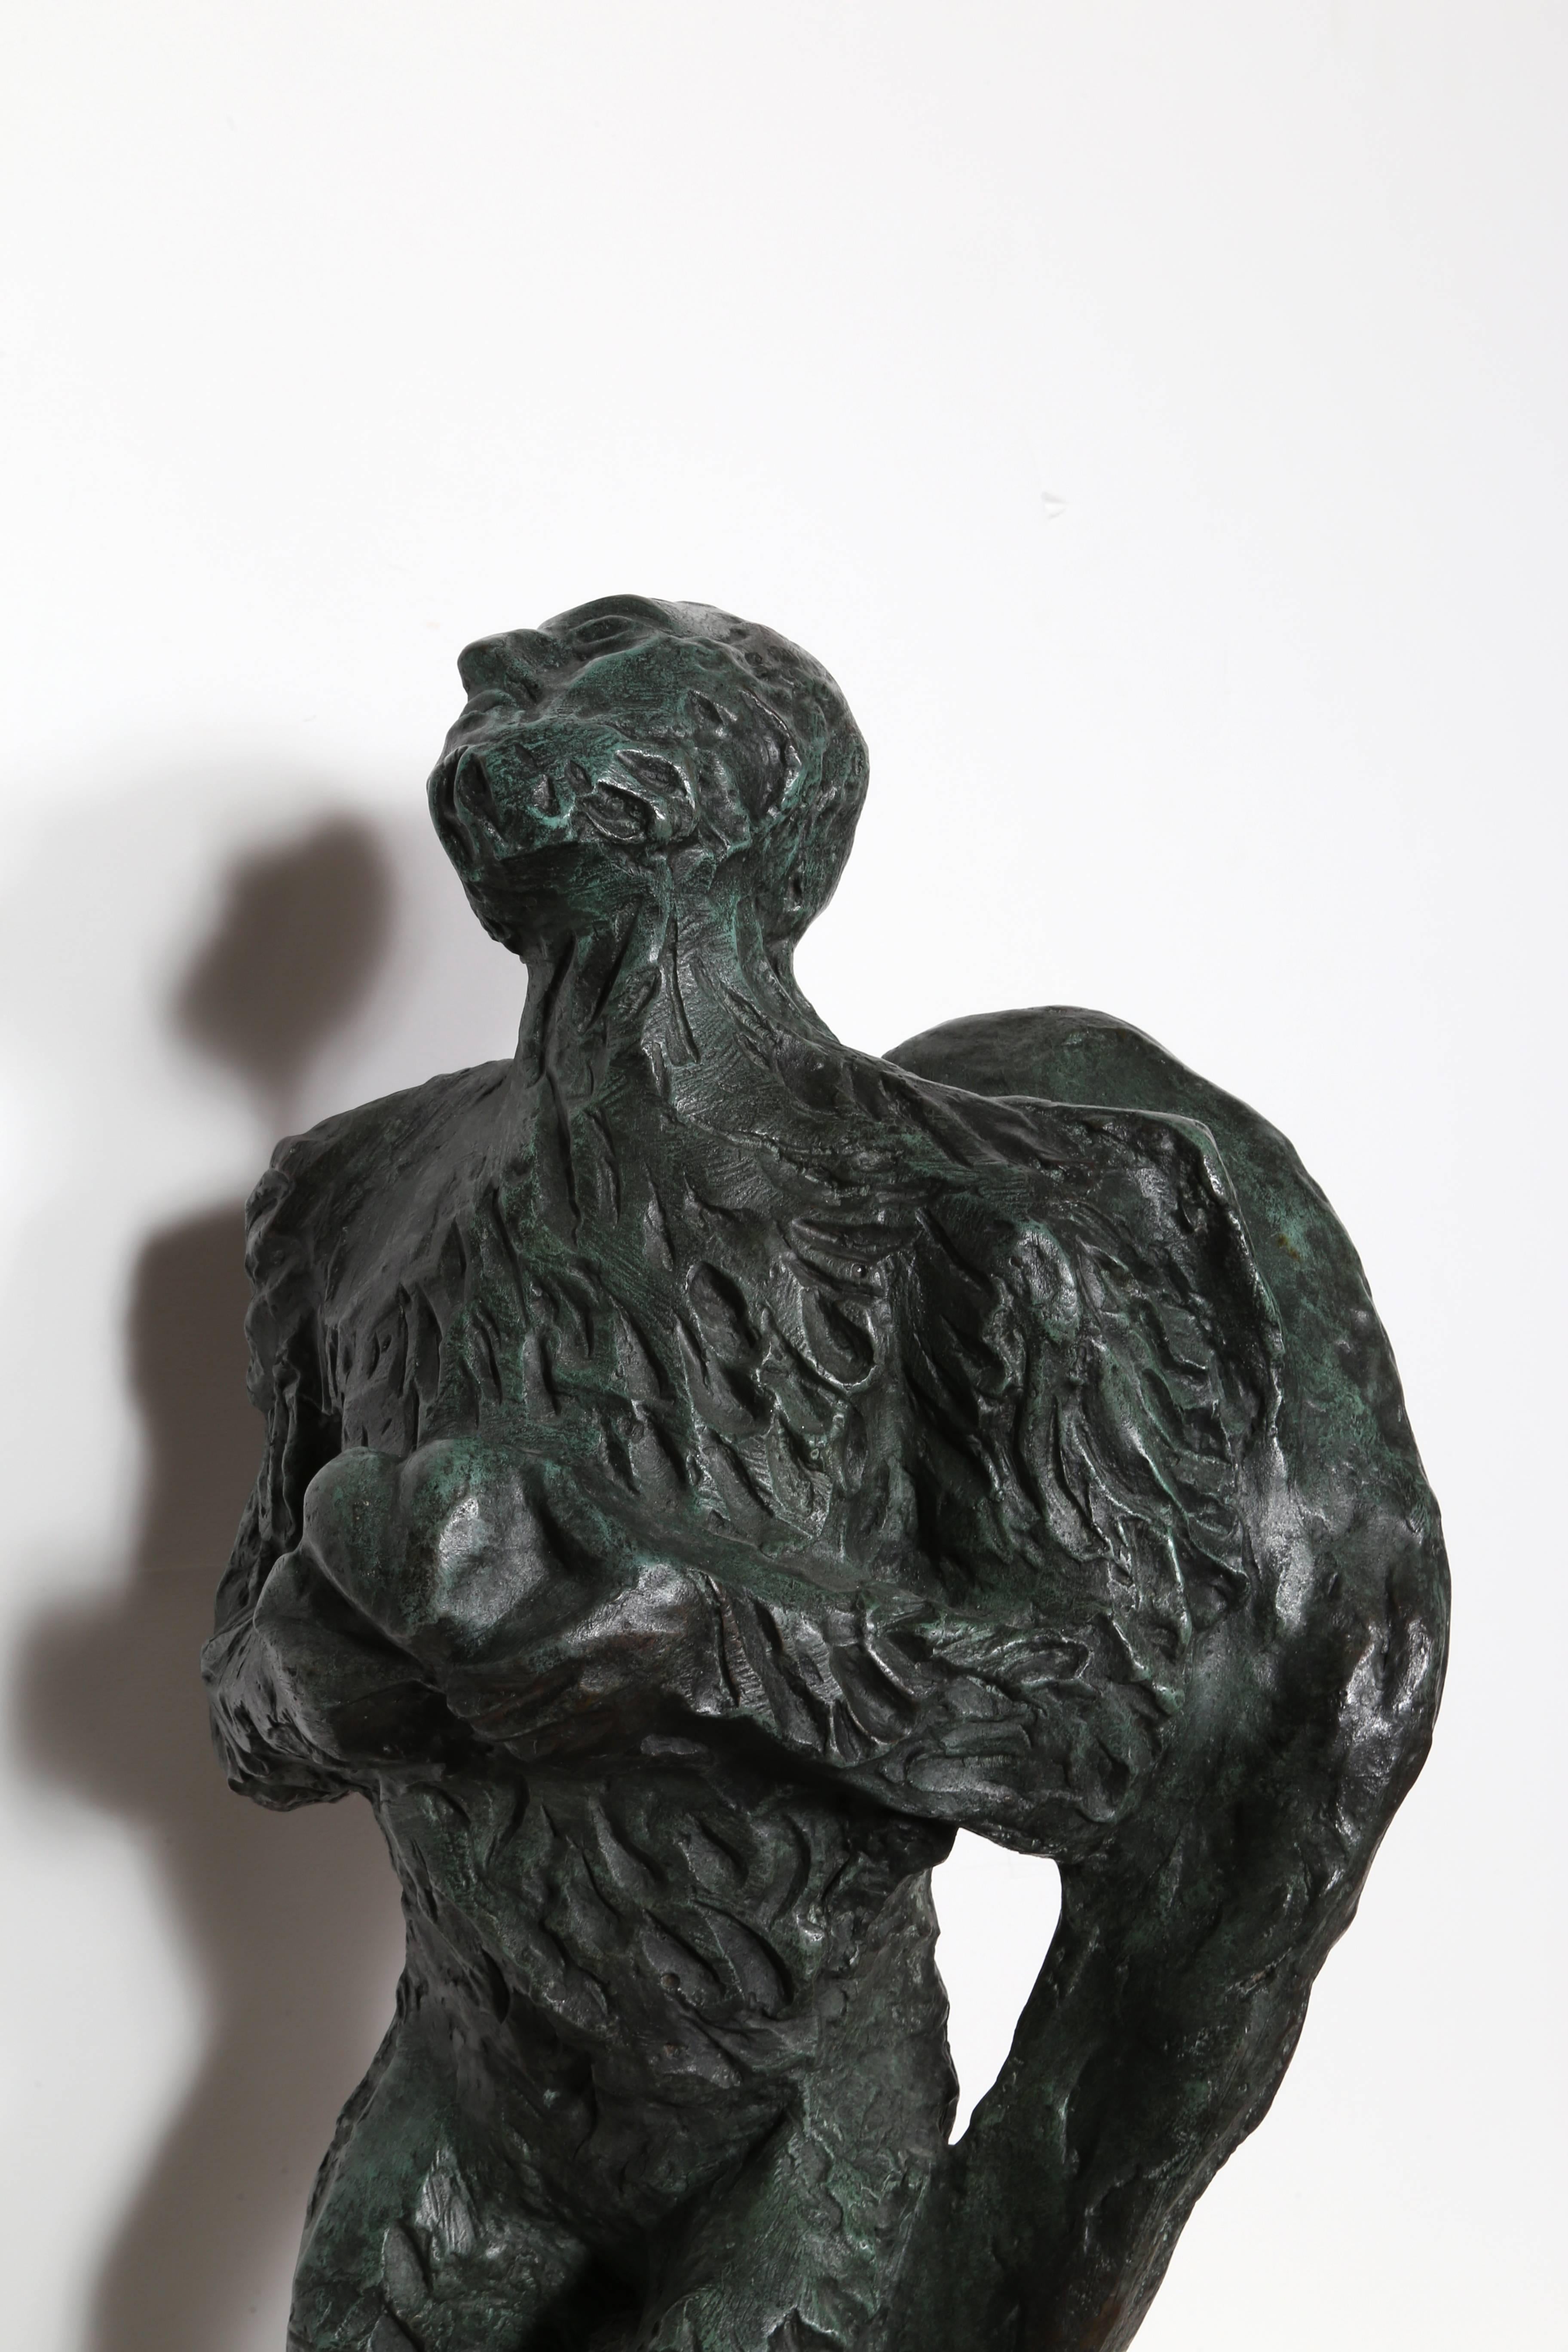 Artist: Sandro Chia (Italian, b. 1946)
Title: Angel with Heart (large)
Year: circa 1980
Edition: 2/6
Medium: Bronze, signature and numbering inscribed
Size: 29  x 14  x 7 in. (73.66  x 35.56  x 17.78 cm)